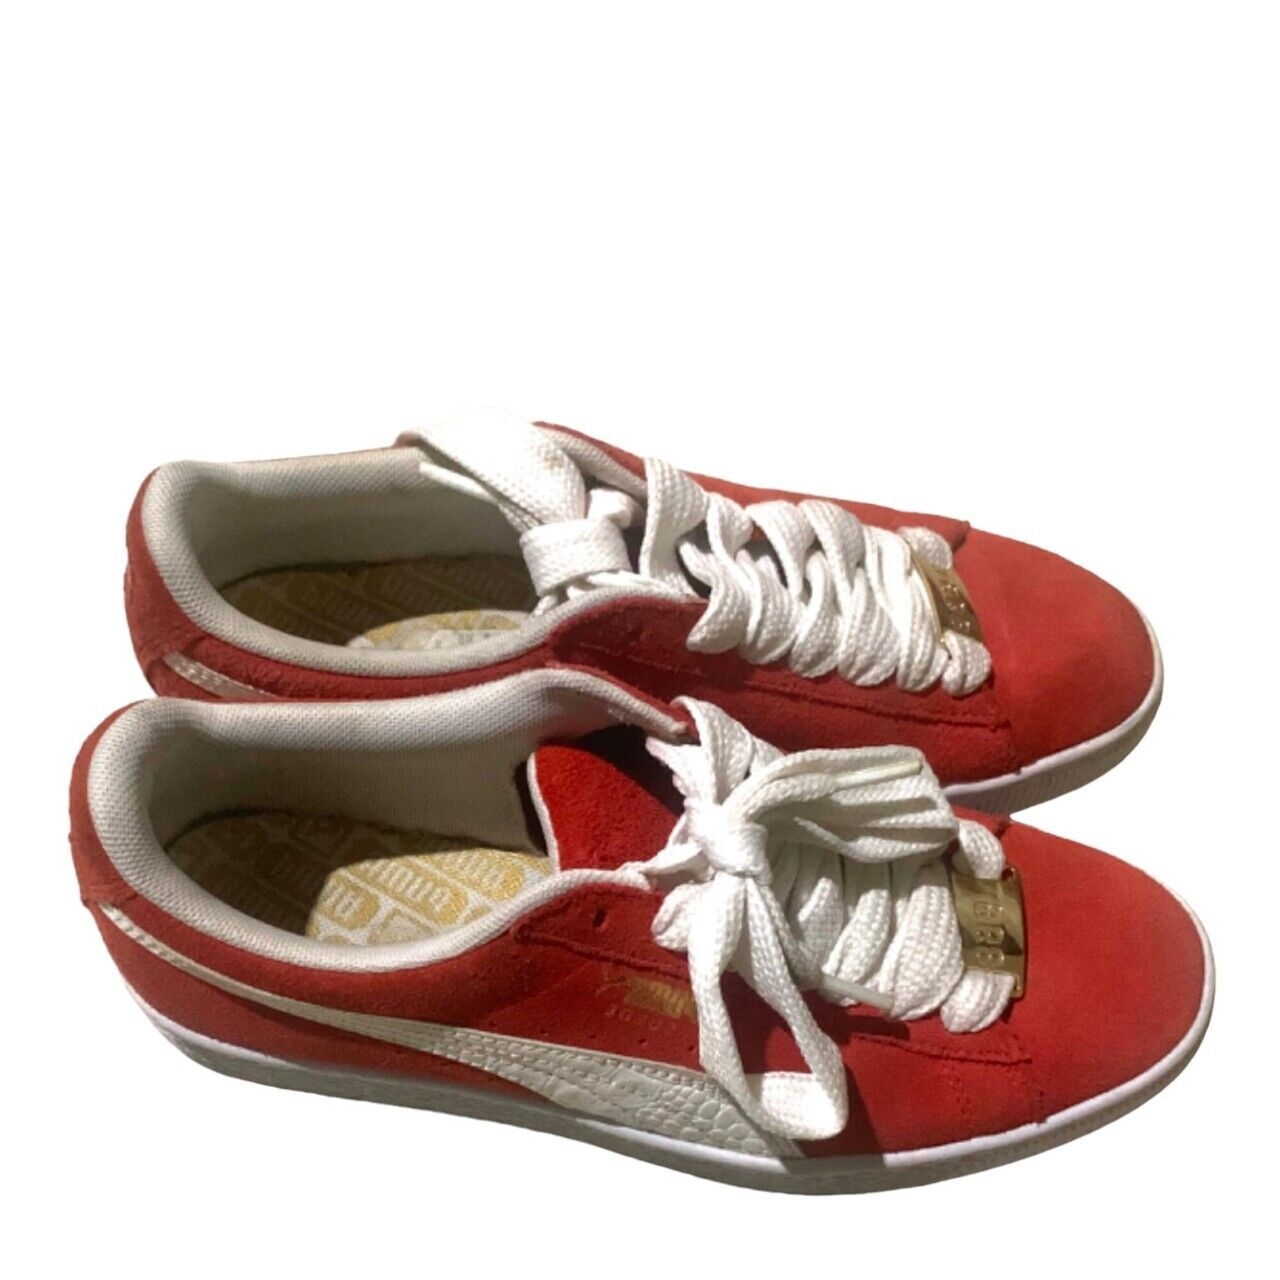 Puma Suede Bboy Fabulous Red Sneakers